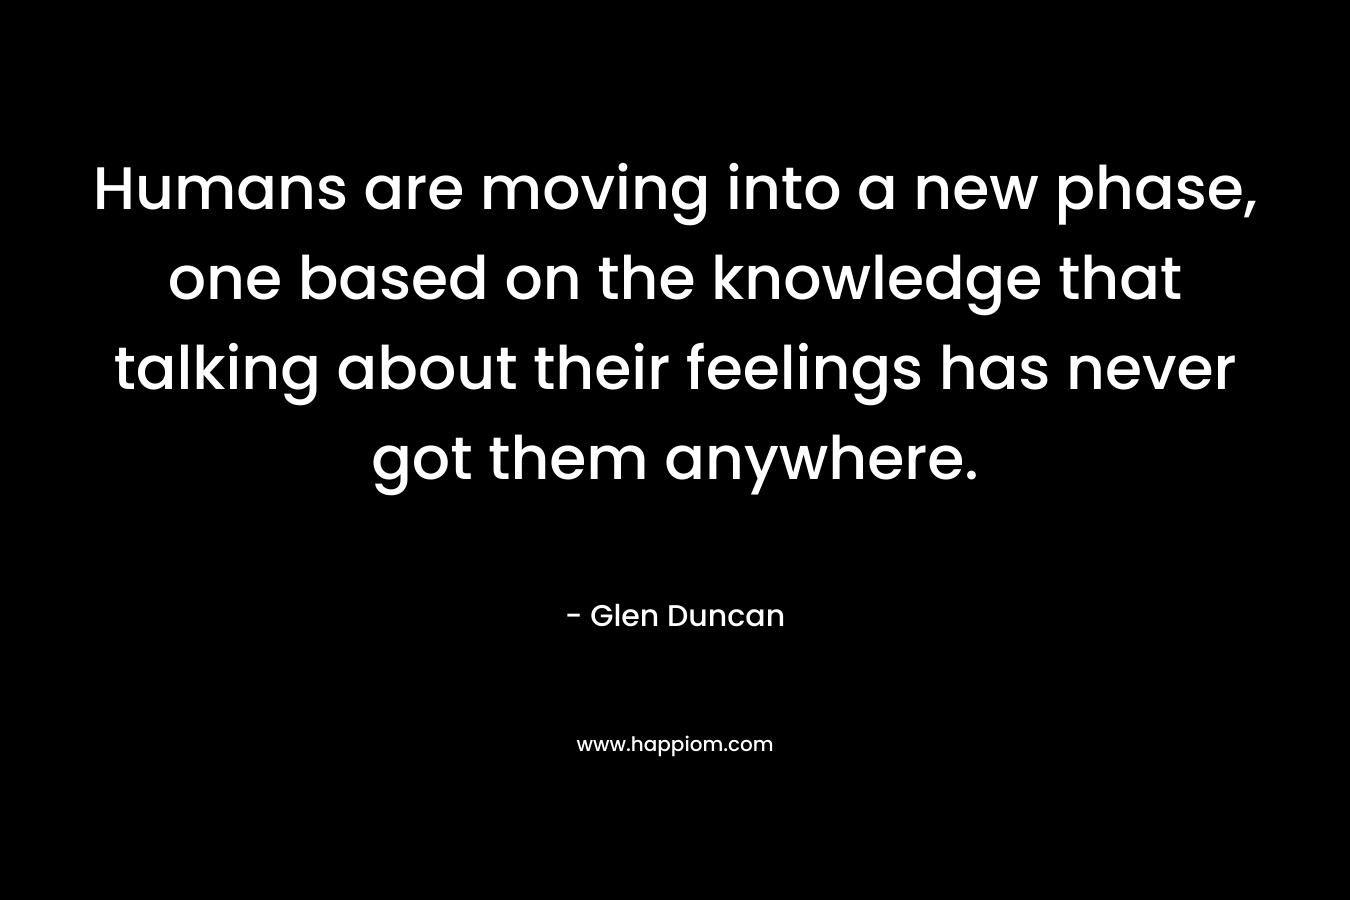 Humans are moving into a new phase, one based on the knowledge that talking about their feelings has never got them anywhere. – Glen Duncan